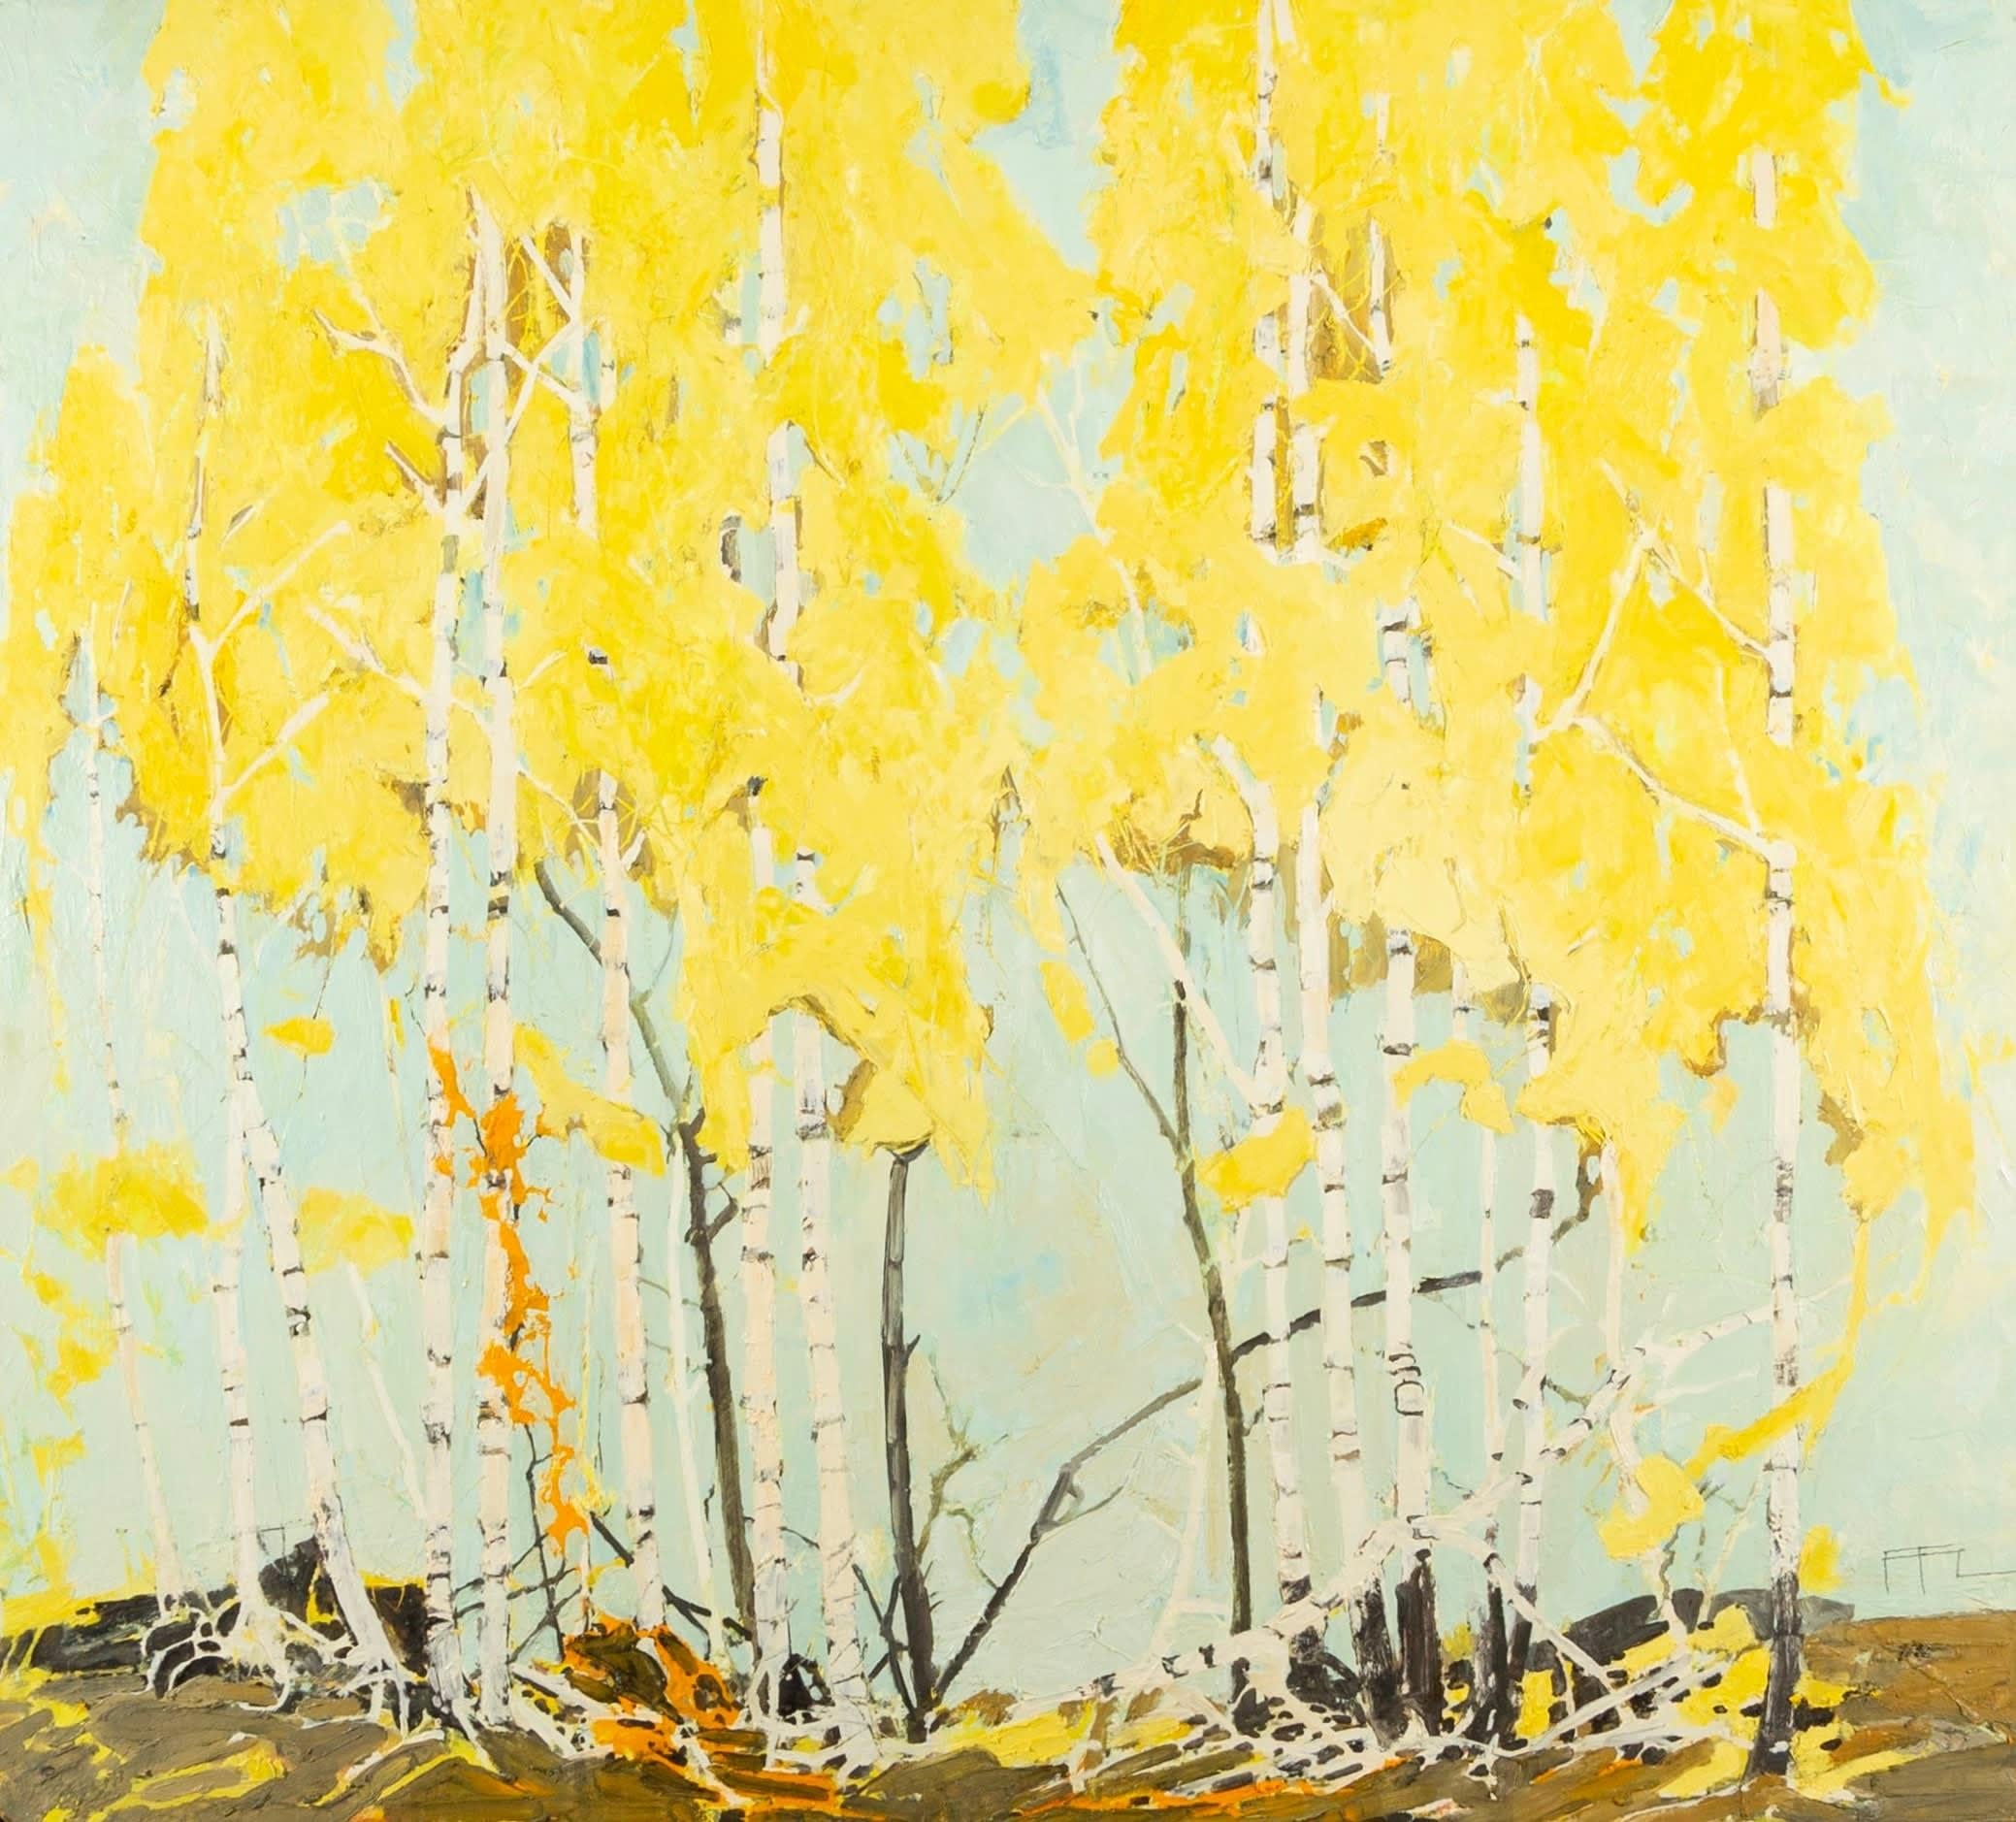 Ramble Through Golden Birch, Oil on Board Painting by Ffiona Lewis, 2019 - Art by Unknown